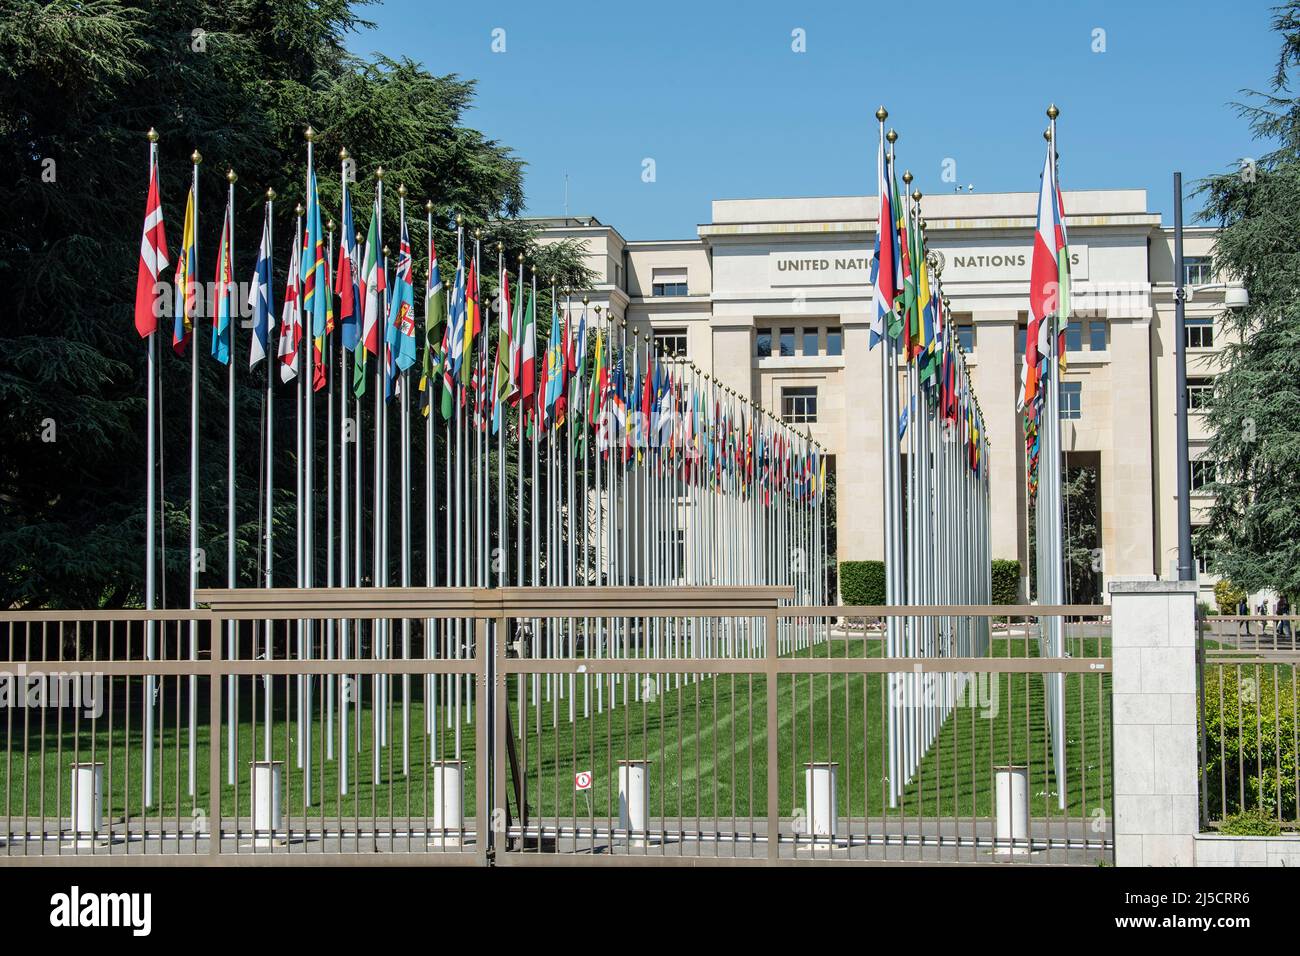 Flags in front of the United Nations building, Geneva, Switzerland Stock Photo